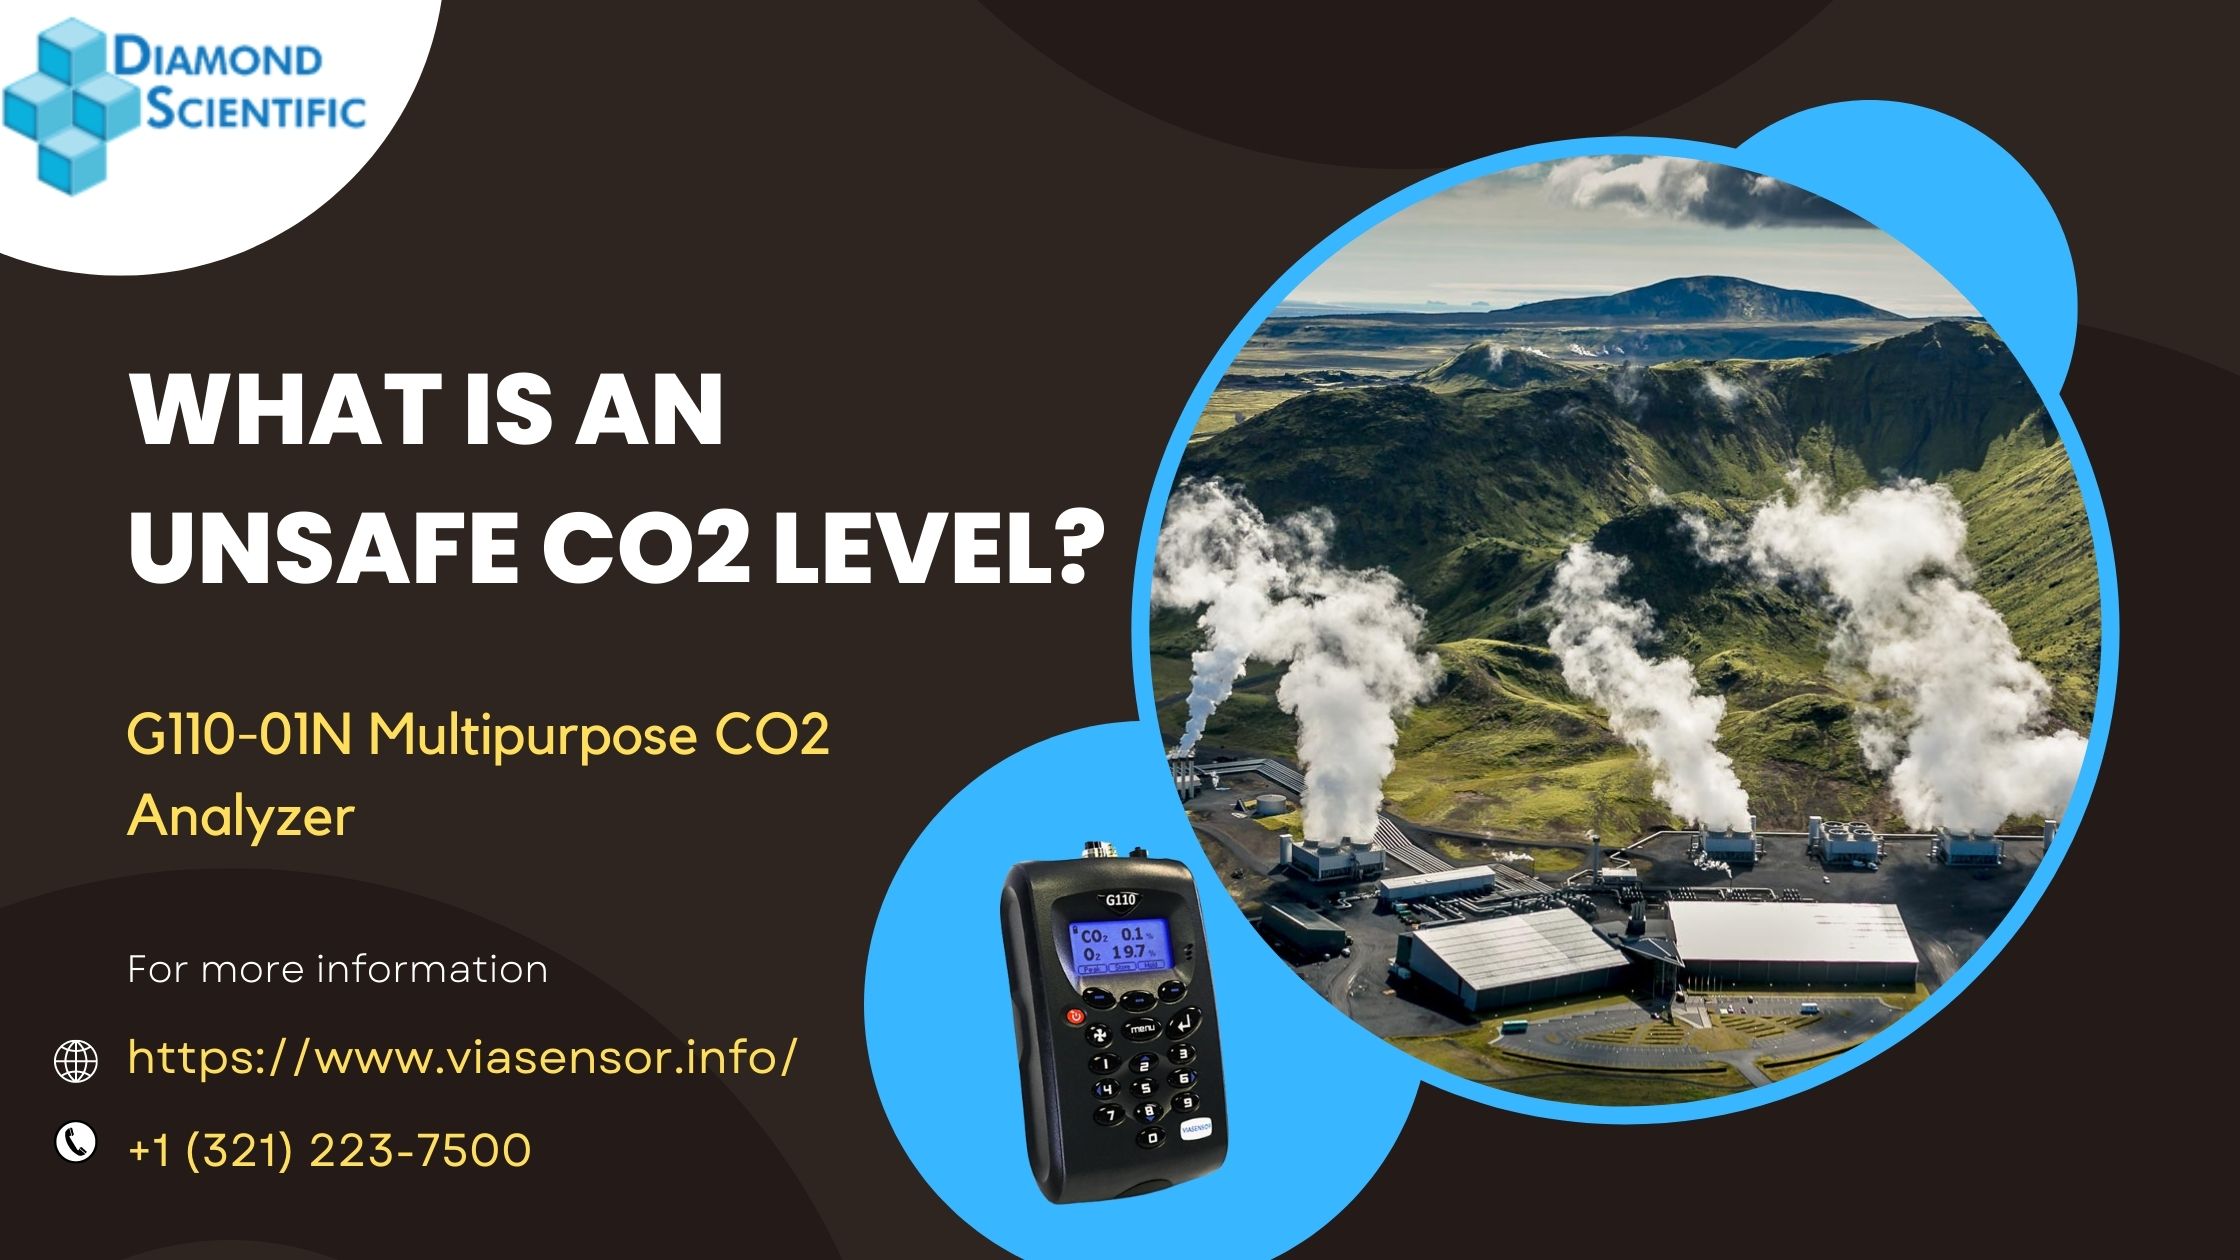 What is an unsafe CO2 level?